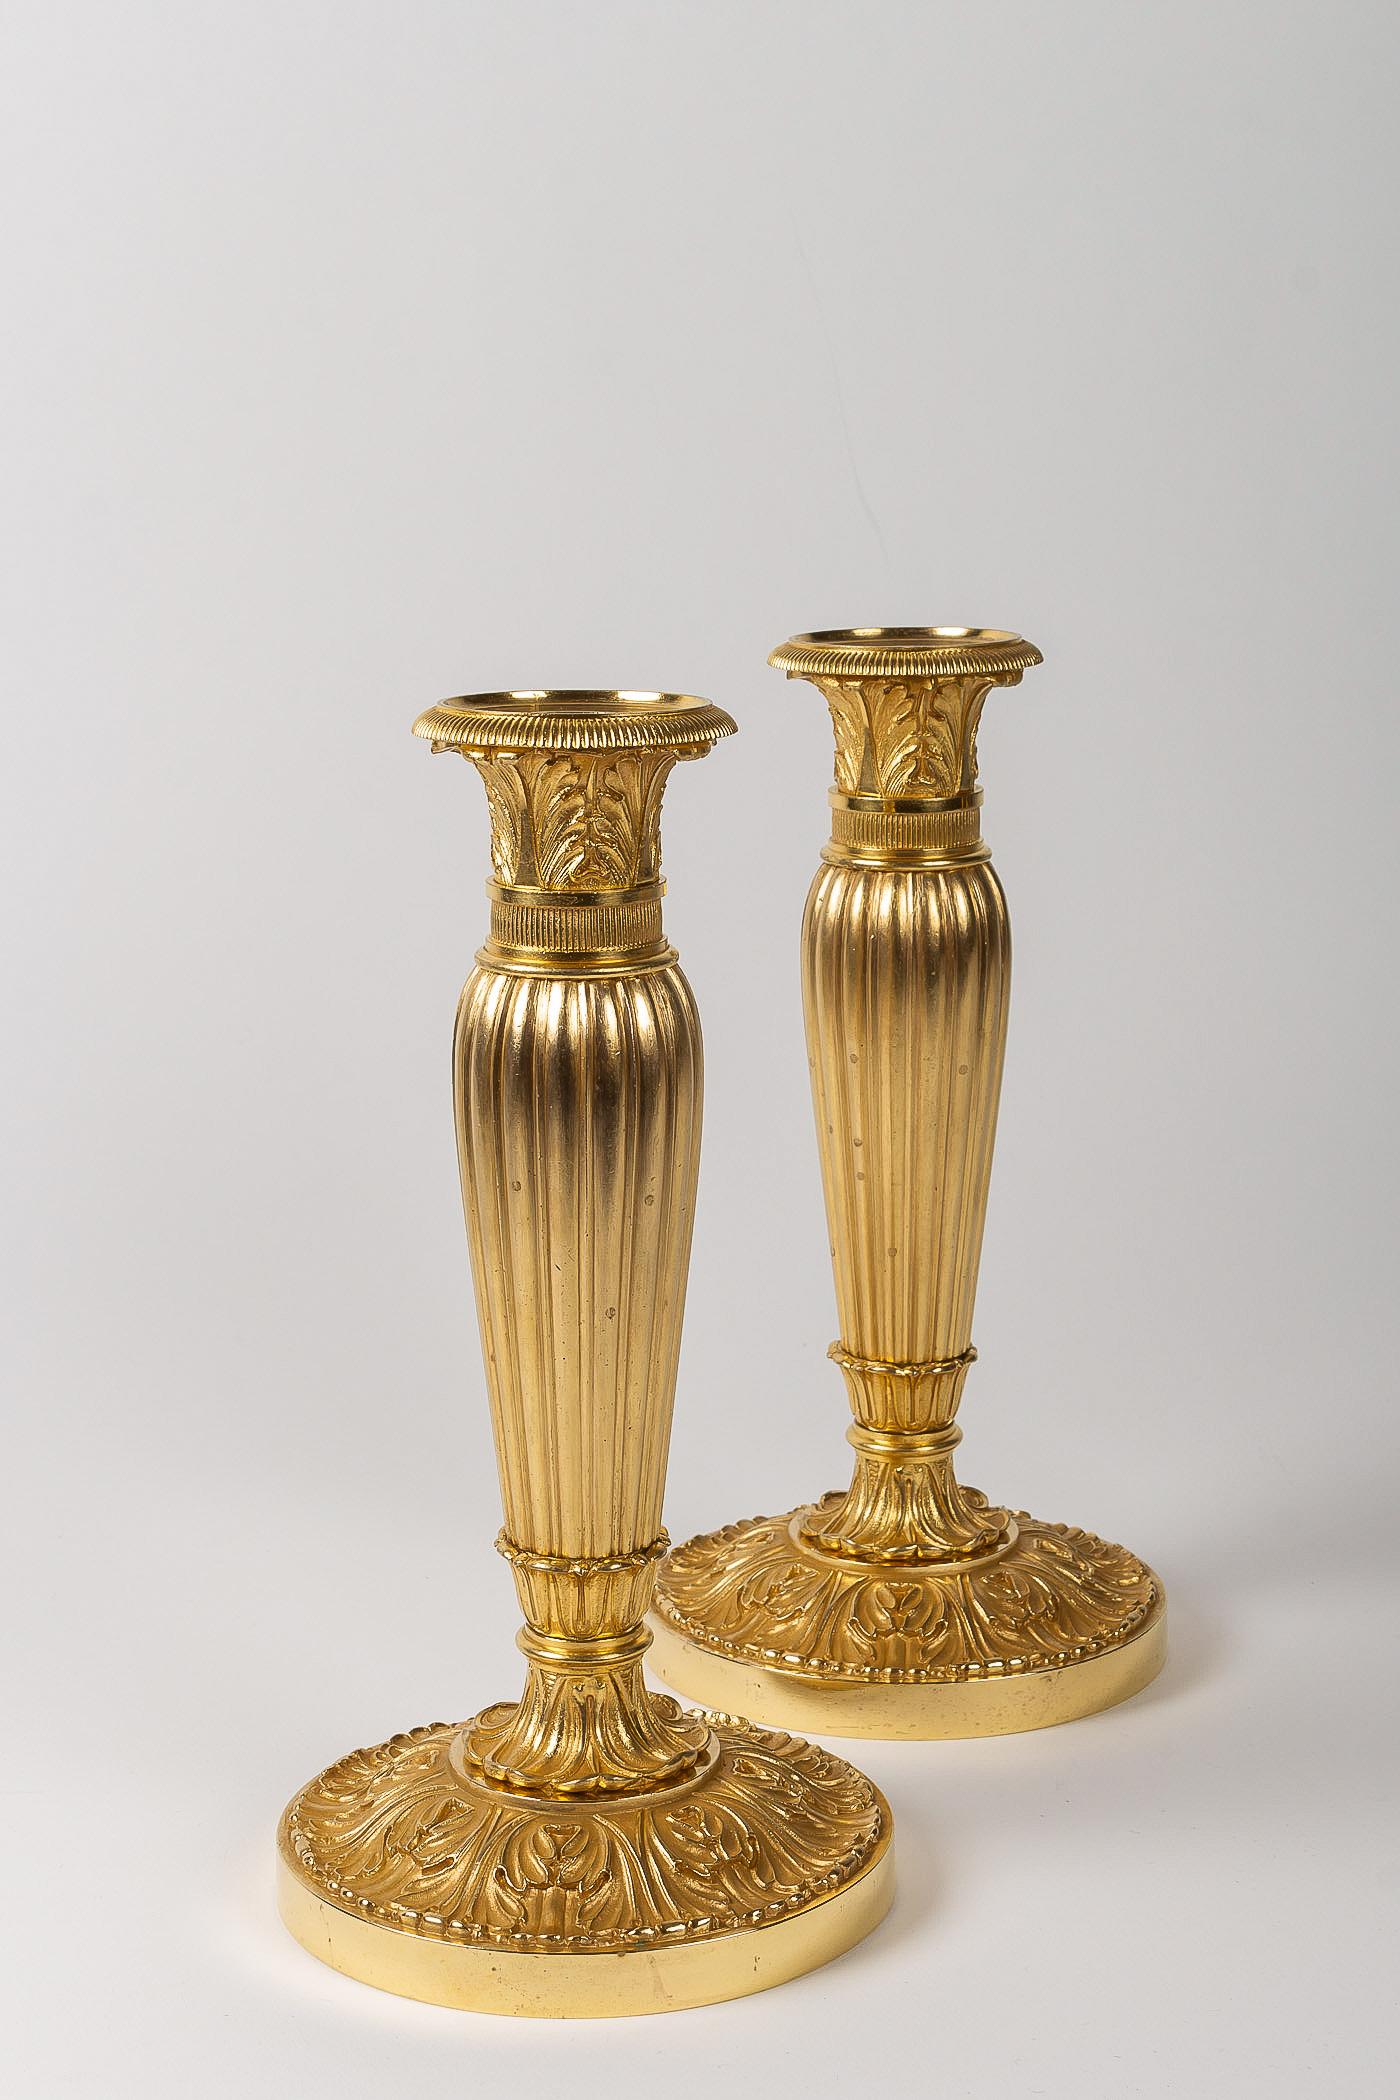 French Empire Period, Pair of Chiseled Gilt-Bronze Candlesticks, circa 1805-1810 6